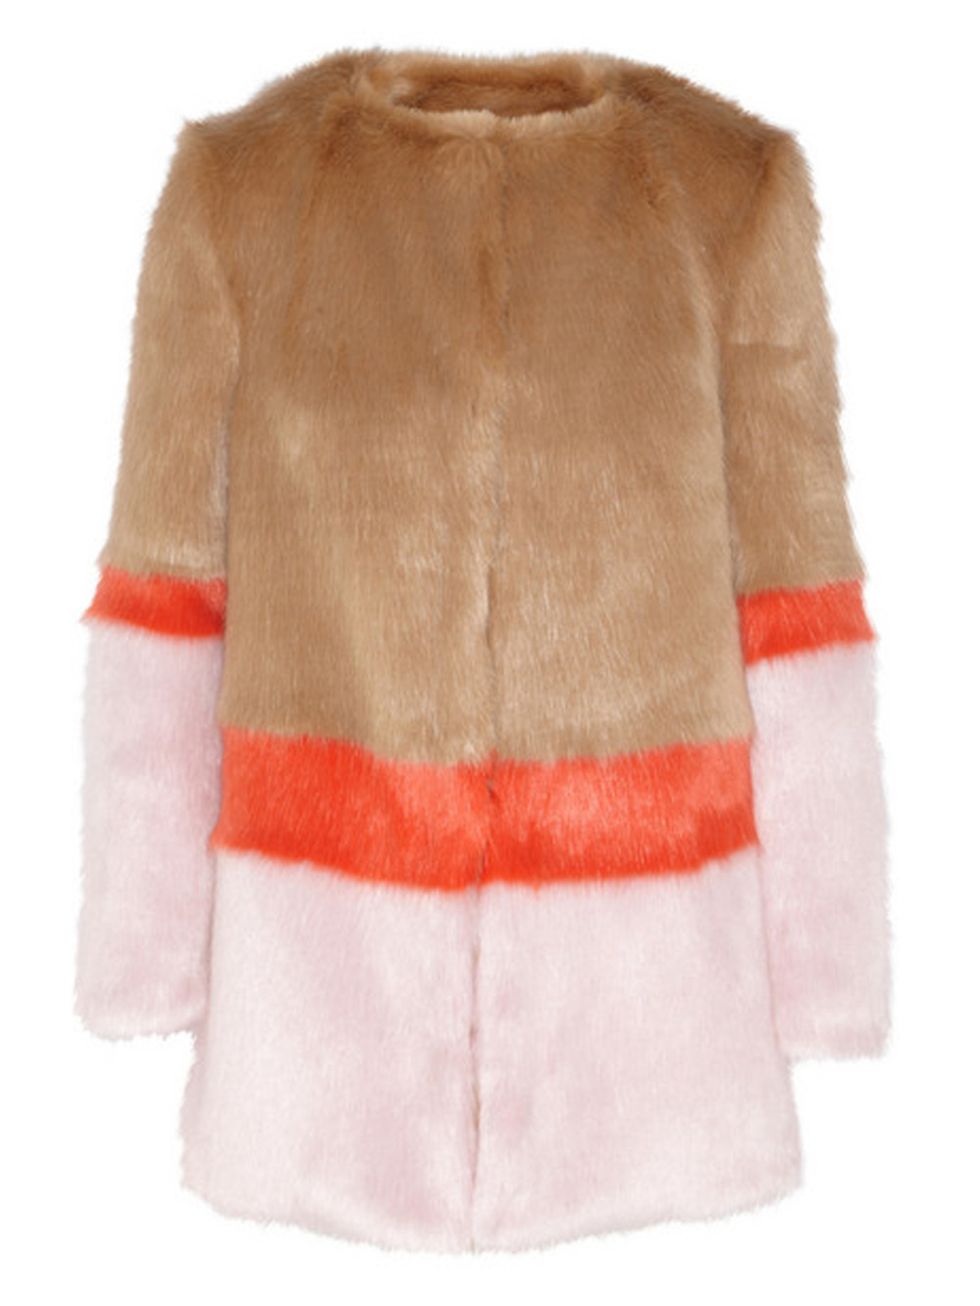 Brown, Sleeve, Textile, Red, White, Fur clothing, Orange, Natural material, Costume accessory, Woolen, 